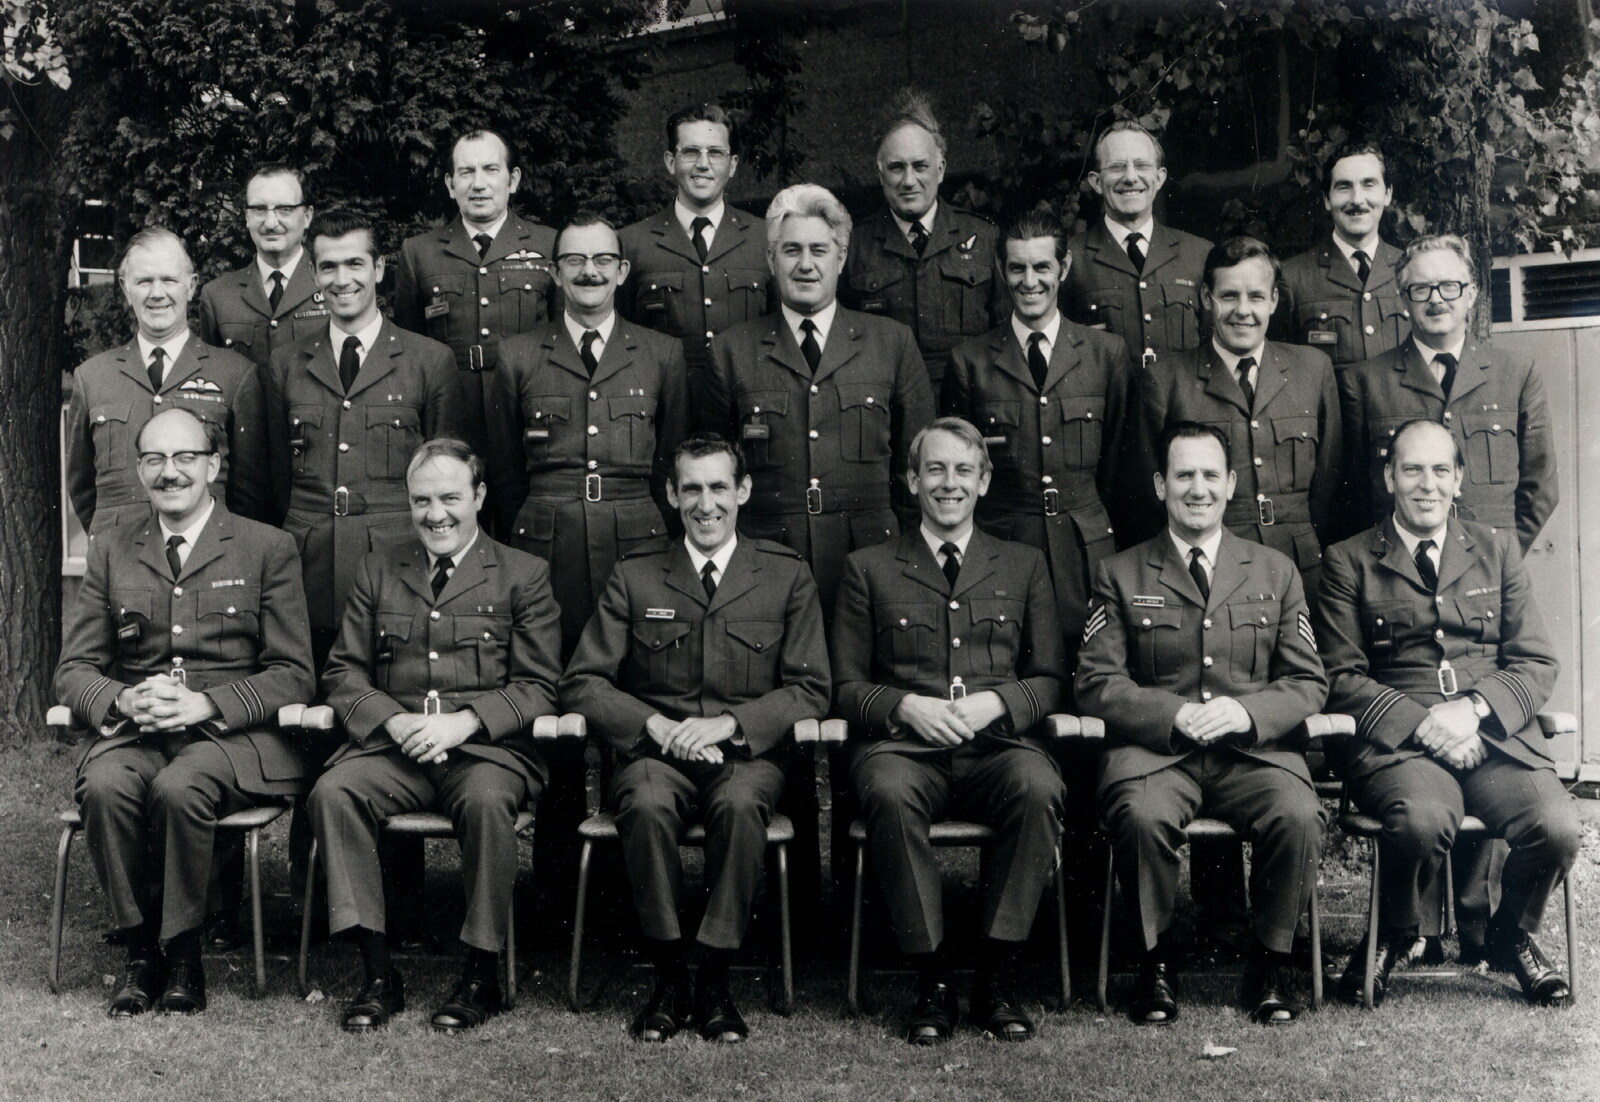 Grandad's RAF Days - Miscellaneous Dates: Middle row, on the far left